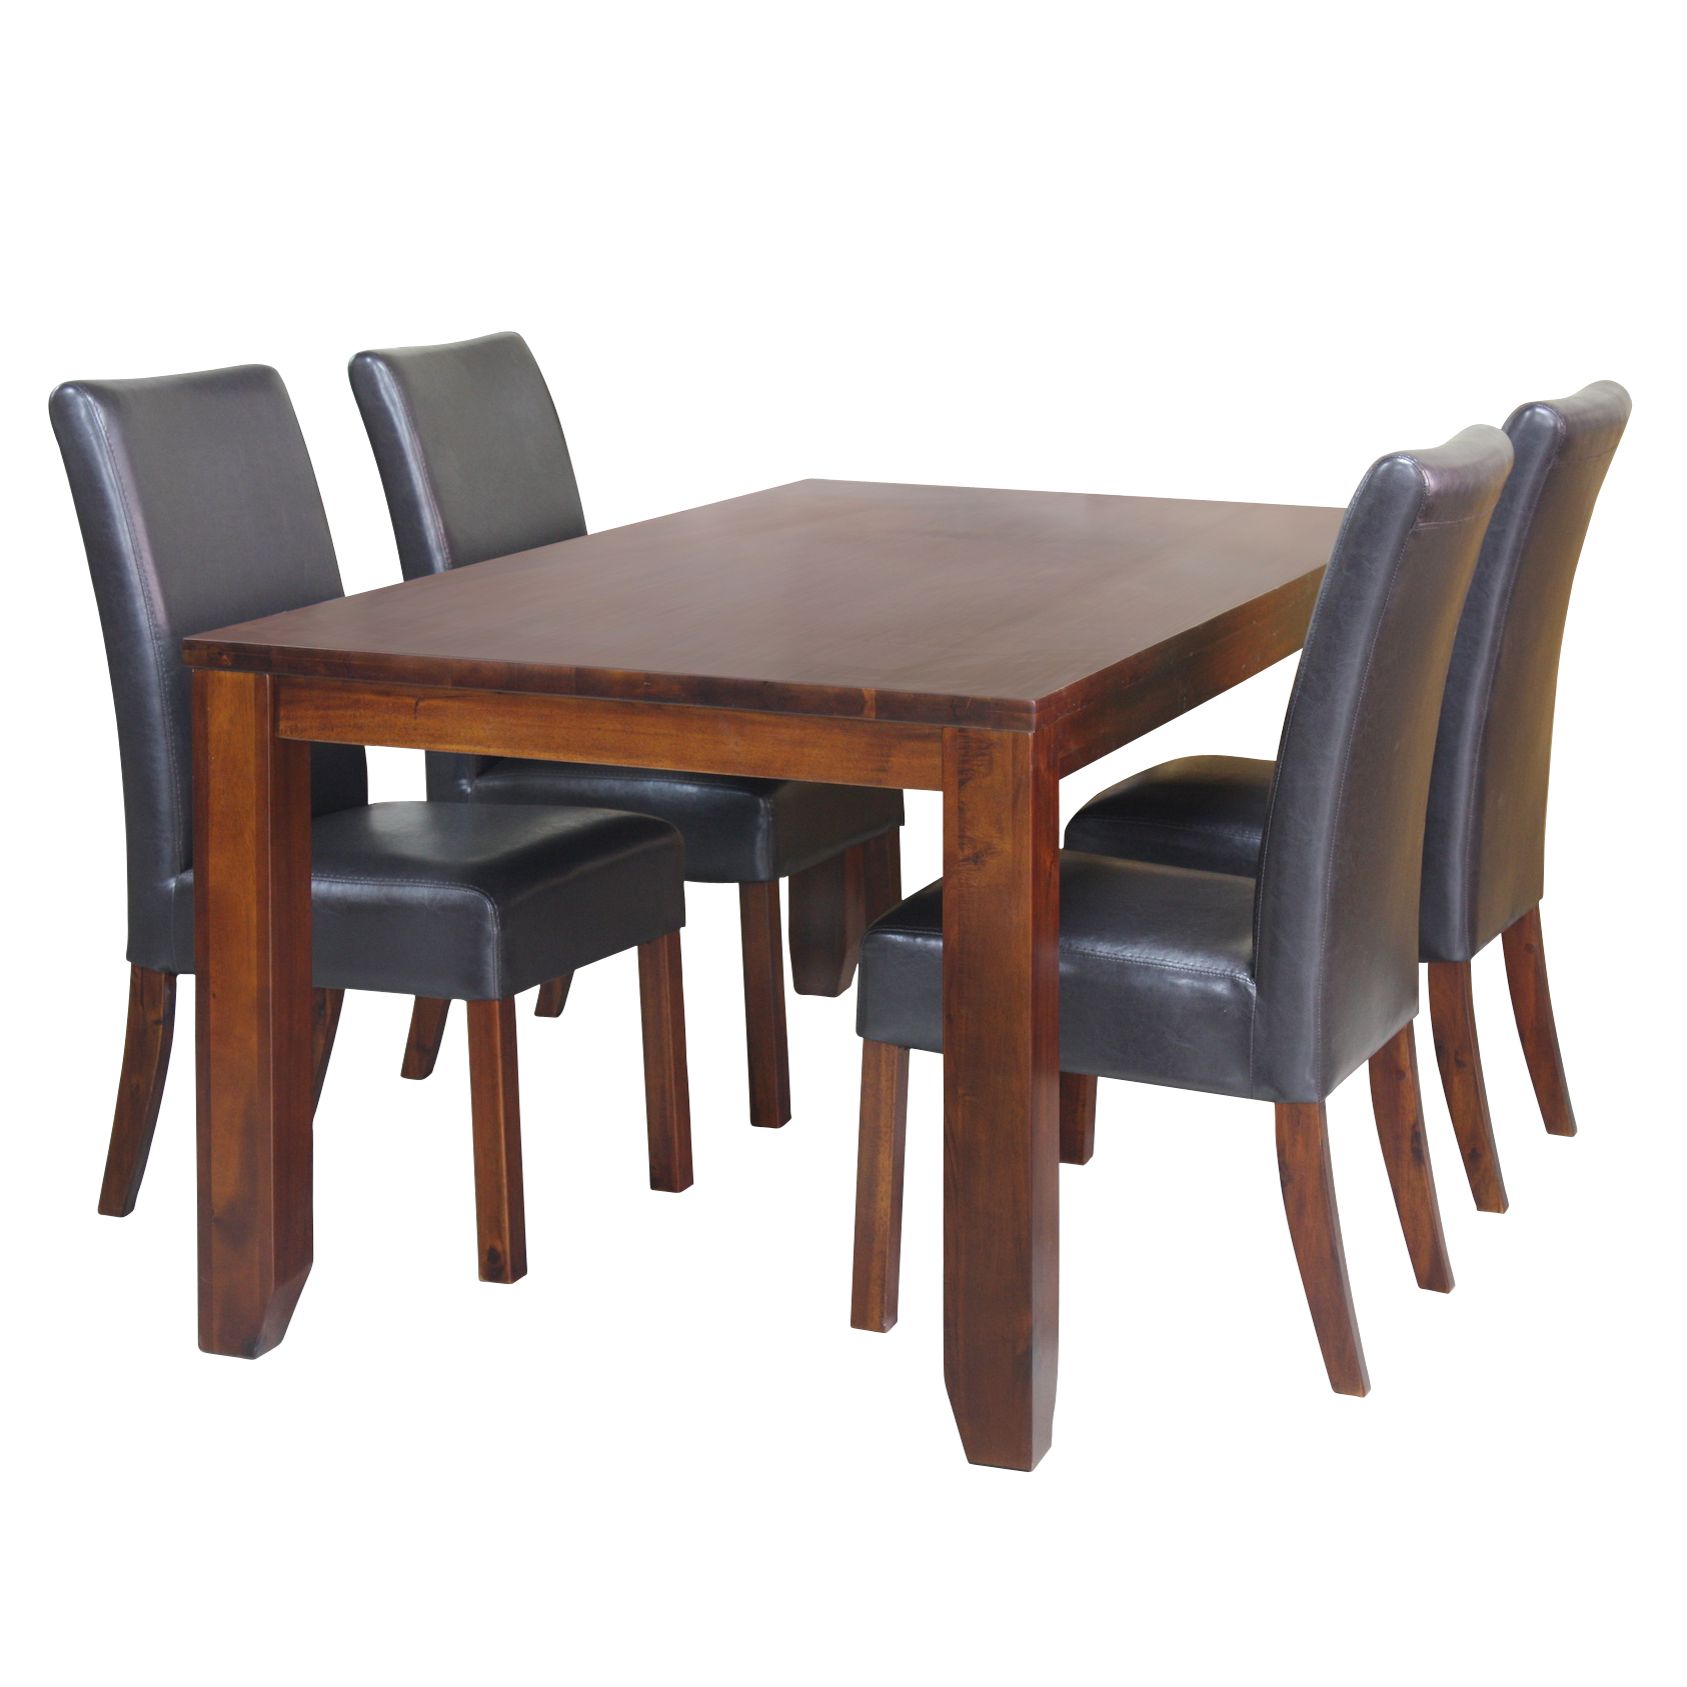 Henley Dining Table and 4 Chairs